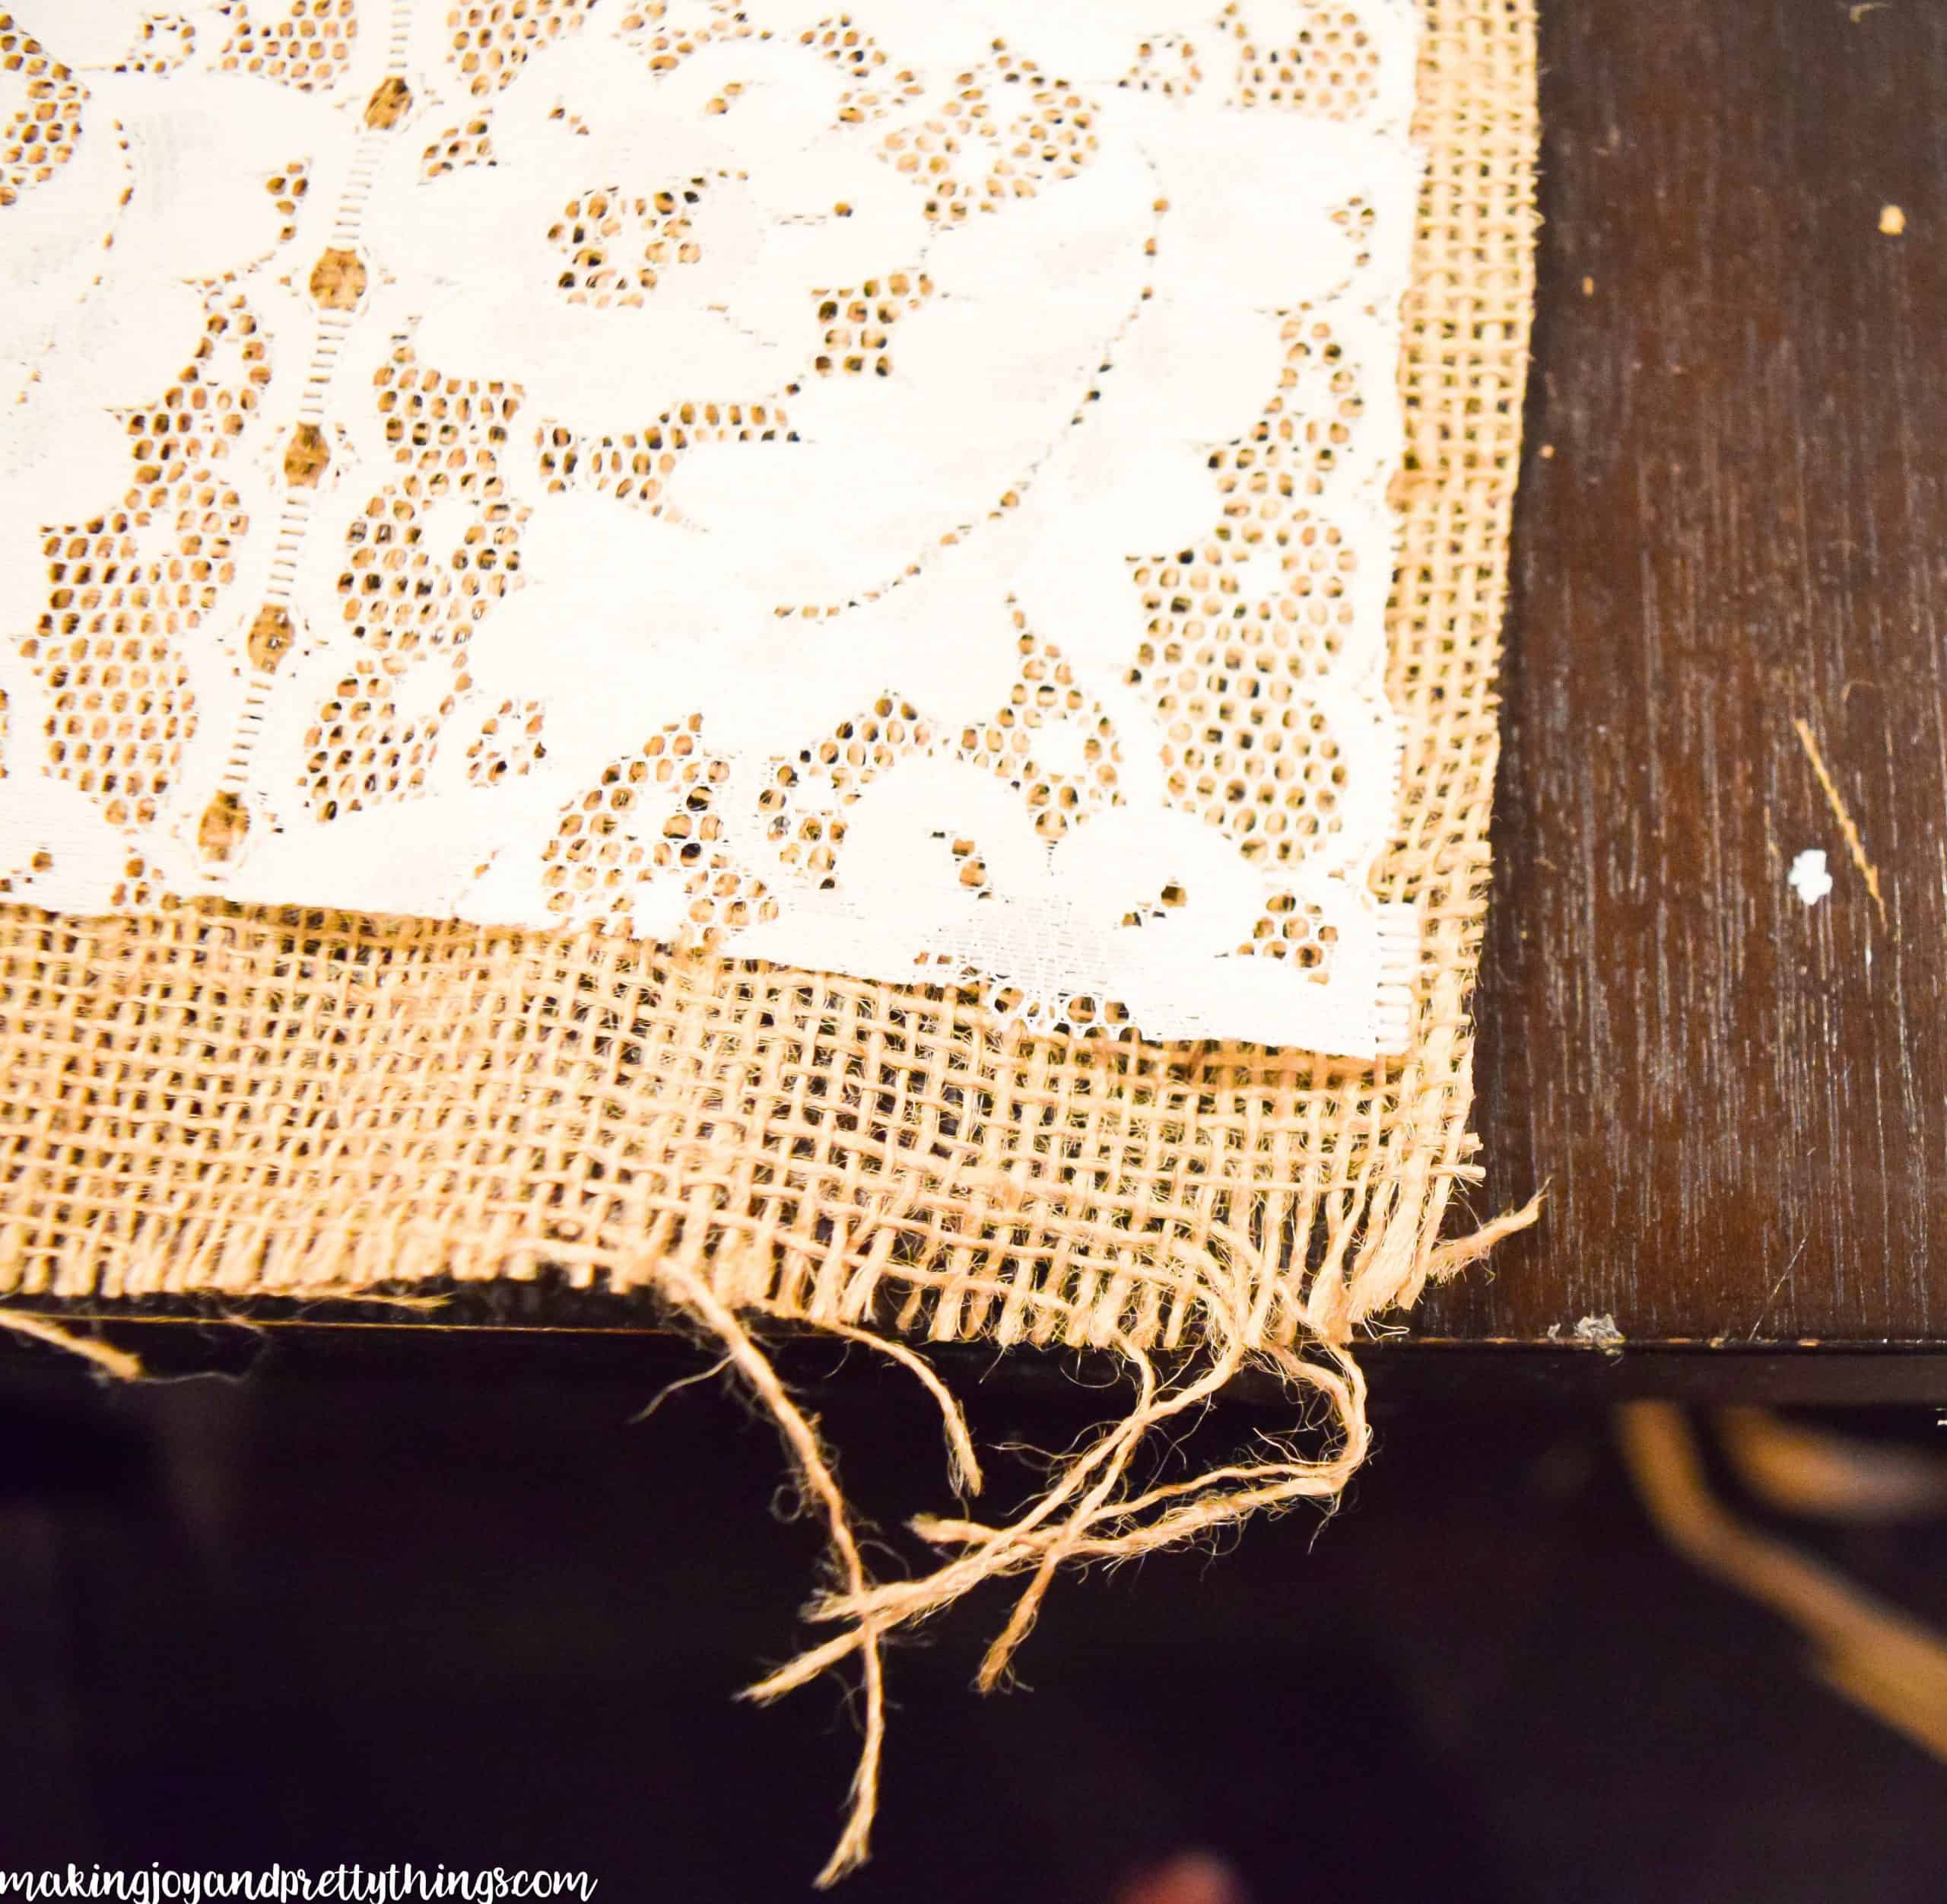 A close up look at the torn ends of the burlap and lace table runner. The ends of the burlap fabric are frayed for a more rustic look.